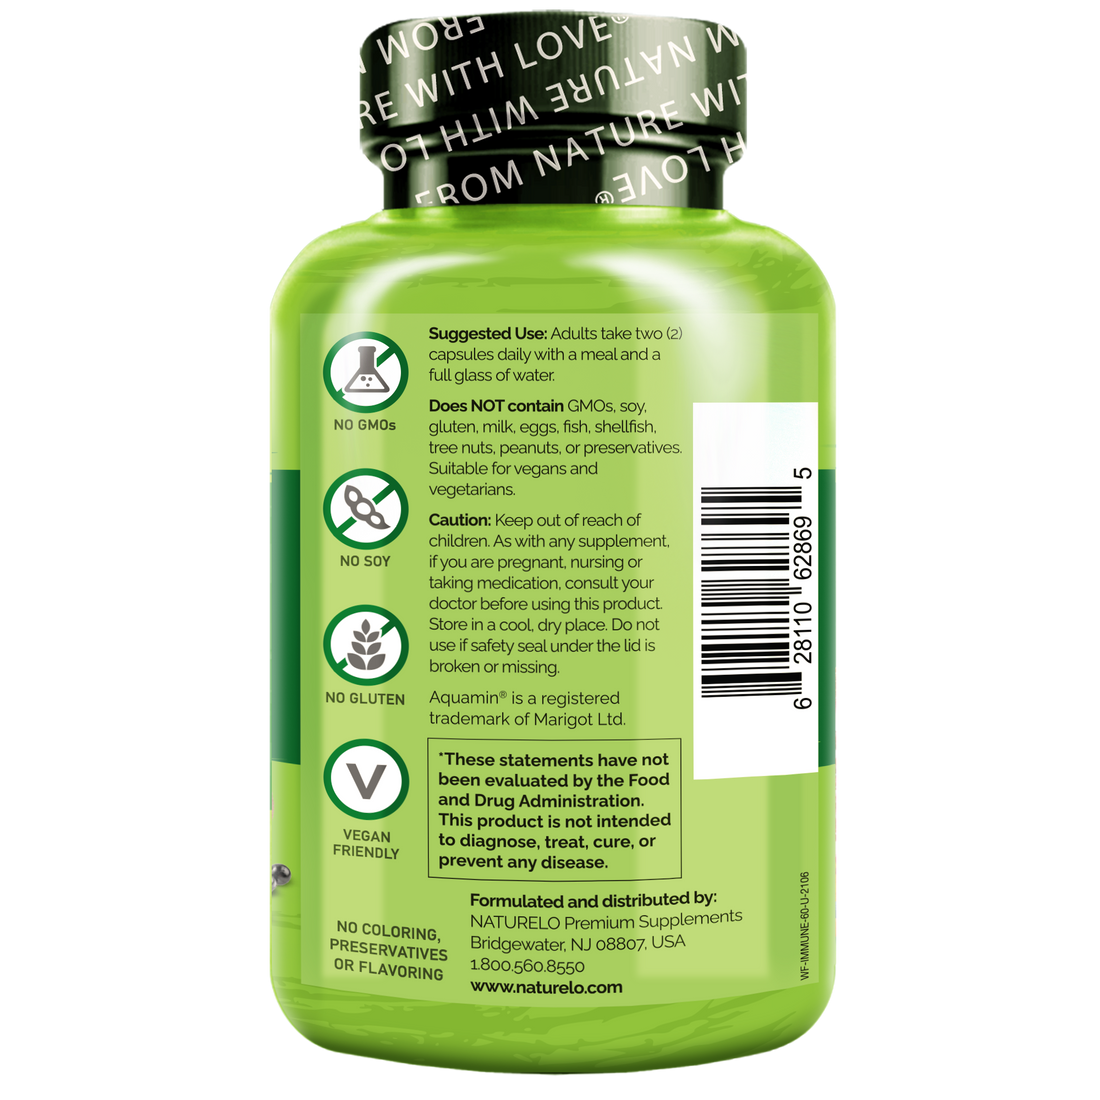 Whole Food Multivitamin with Immune Support Blend